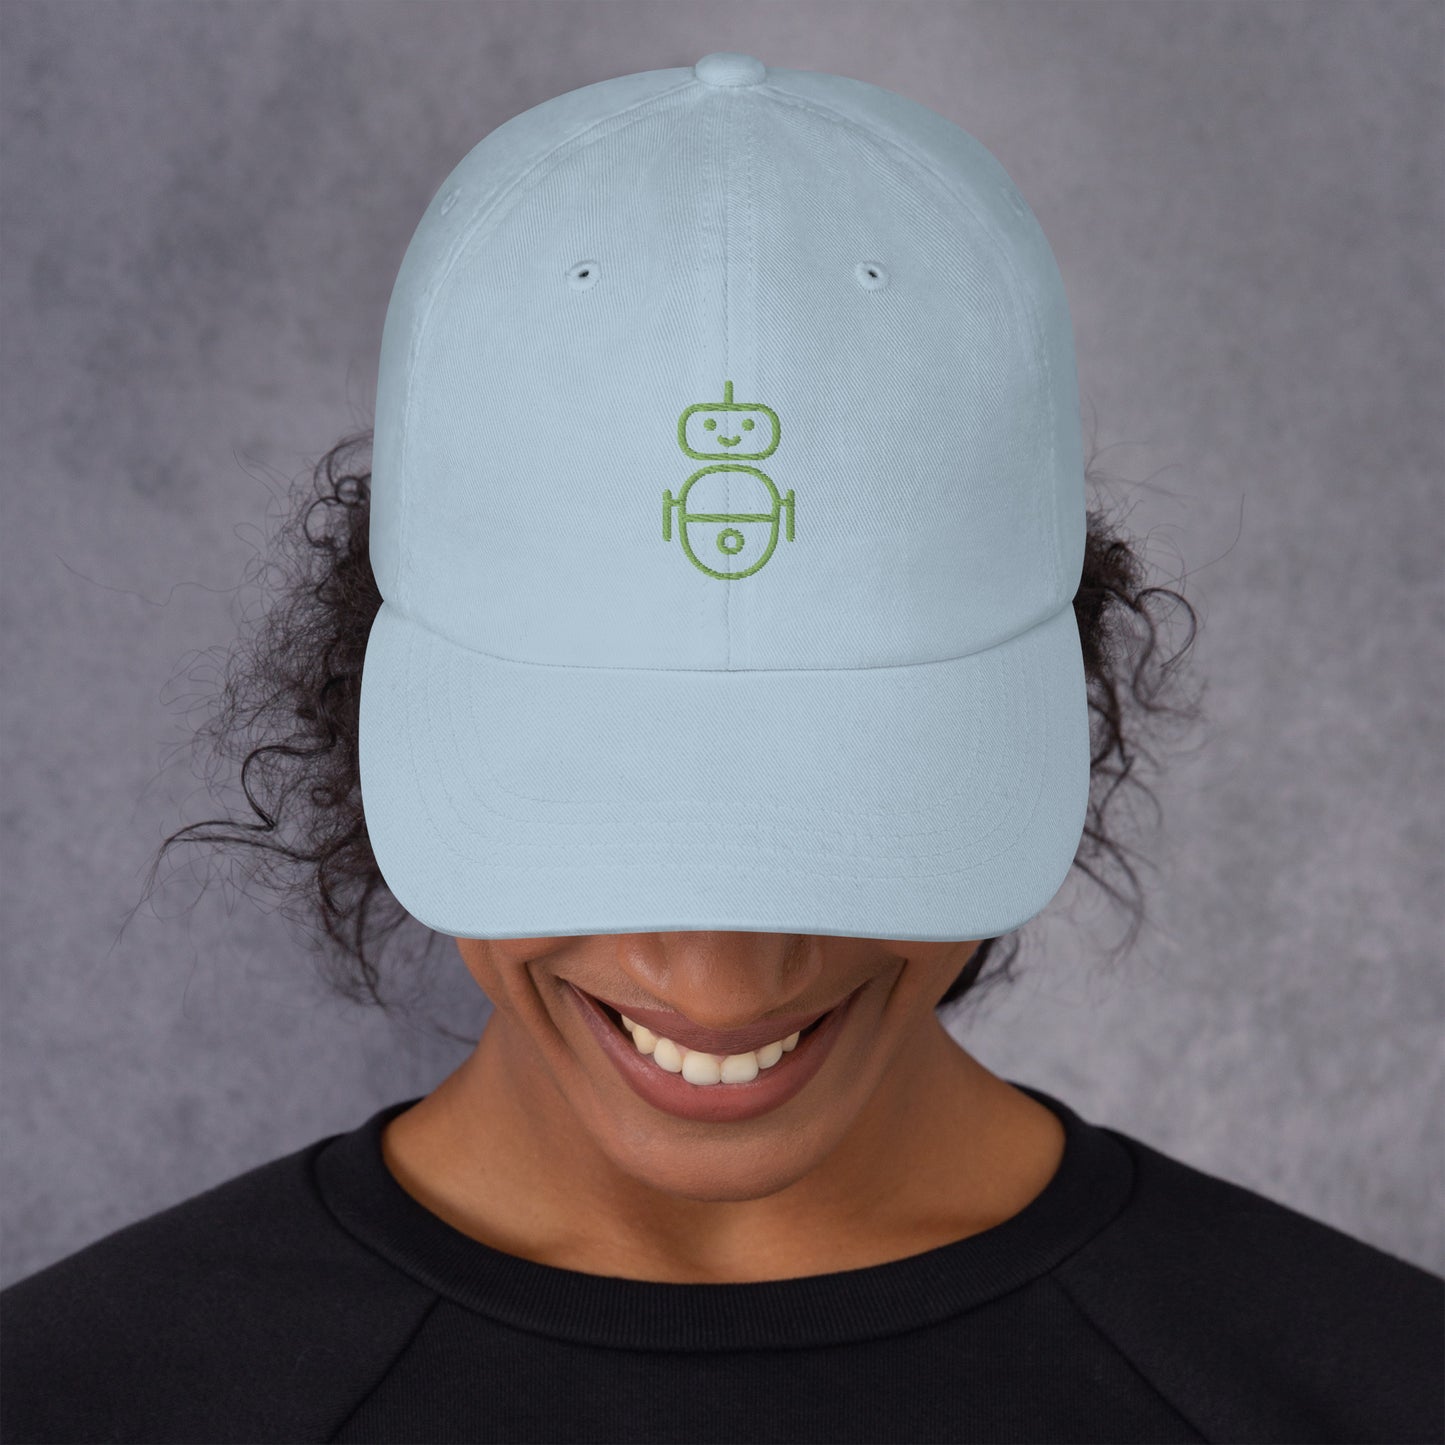 Women with light blue hat with in green Android logo